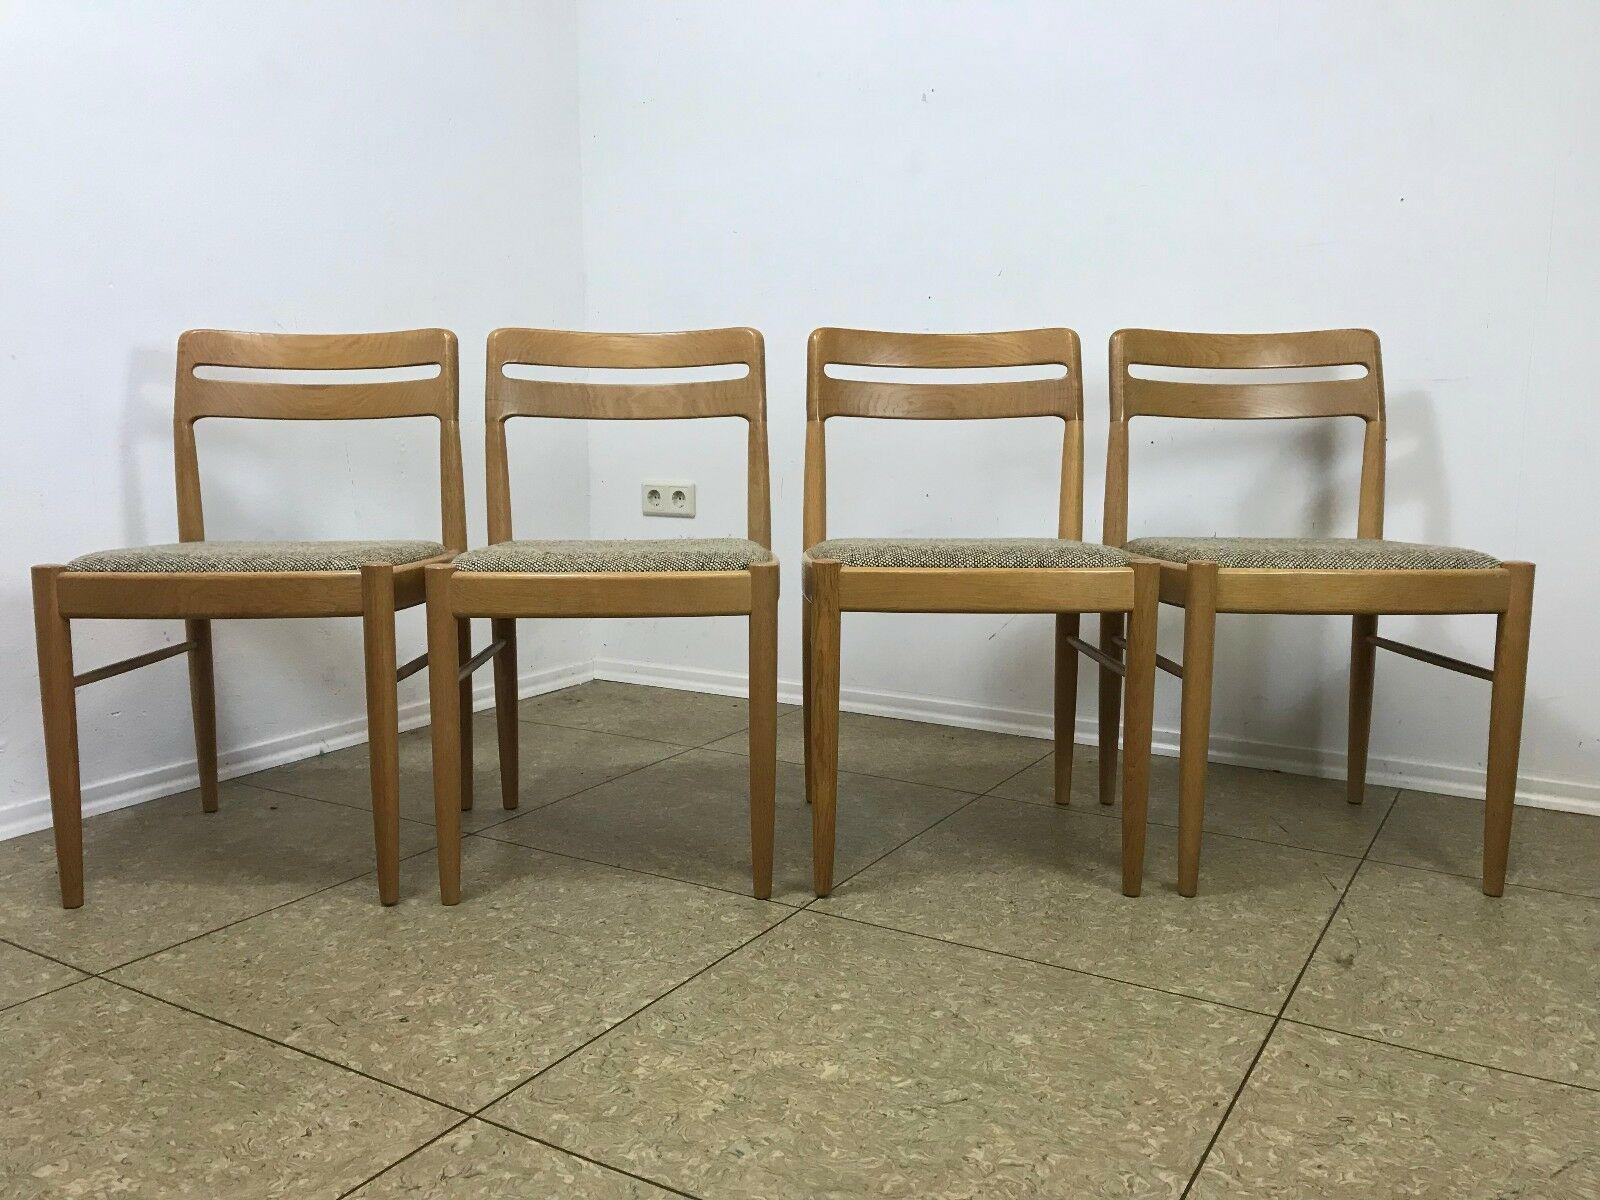 4x 60s 70s Oak dining chairs Danish design H.W Klein for Bramin

Object: 4x chair

Manufacturer: Bramin

Condition: good

Age: around 1960-1970

Dimensions:

47cm x 53cm x 78.5cm
Seat height = 46cm

Other notes:

The pictures serve